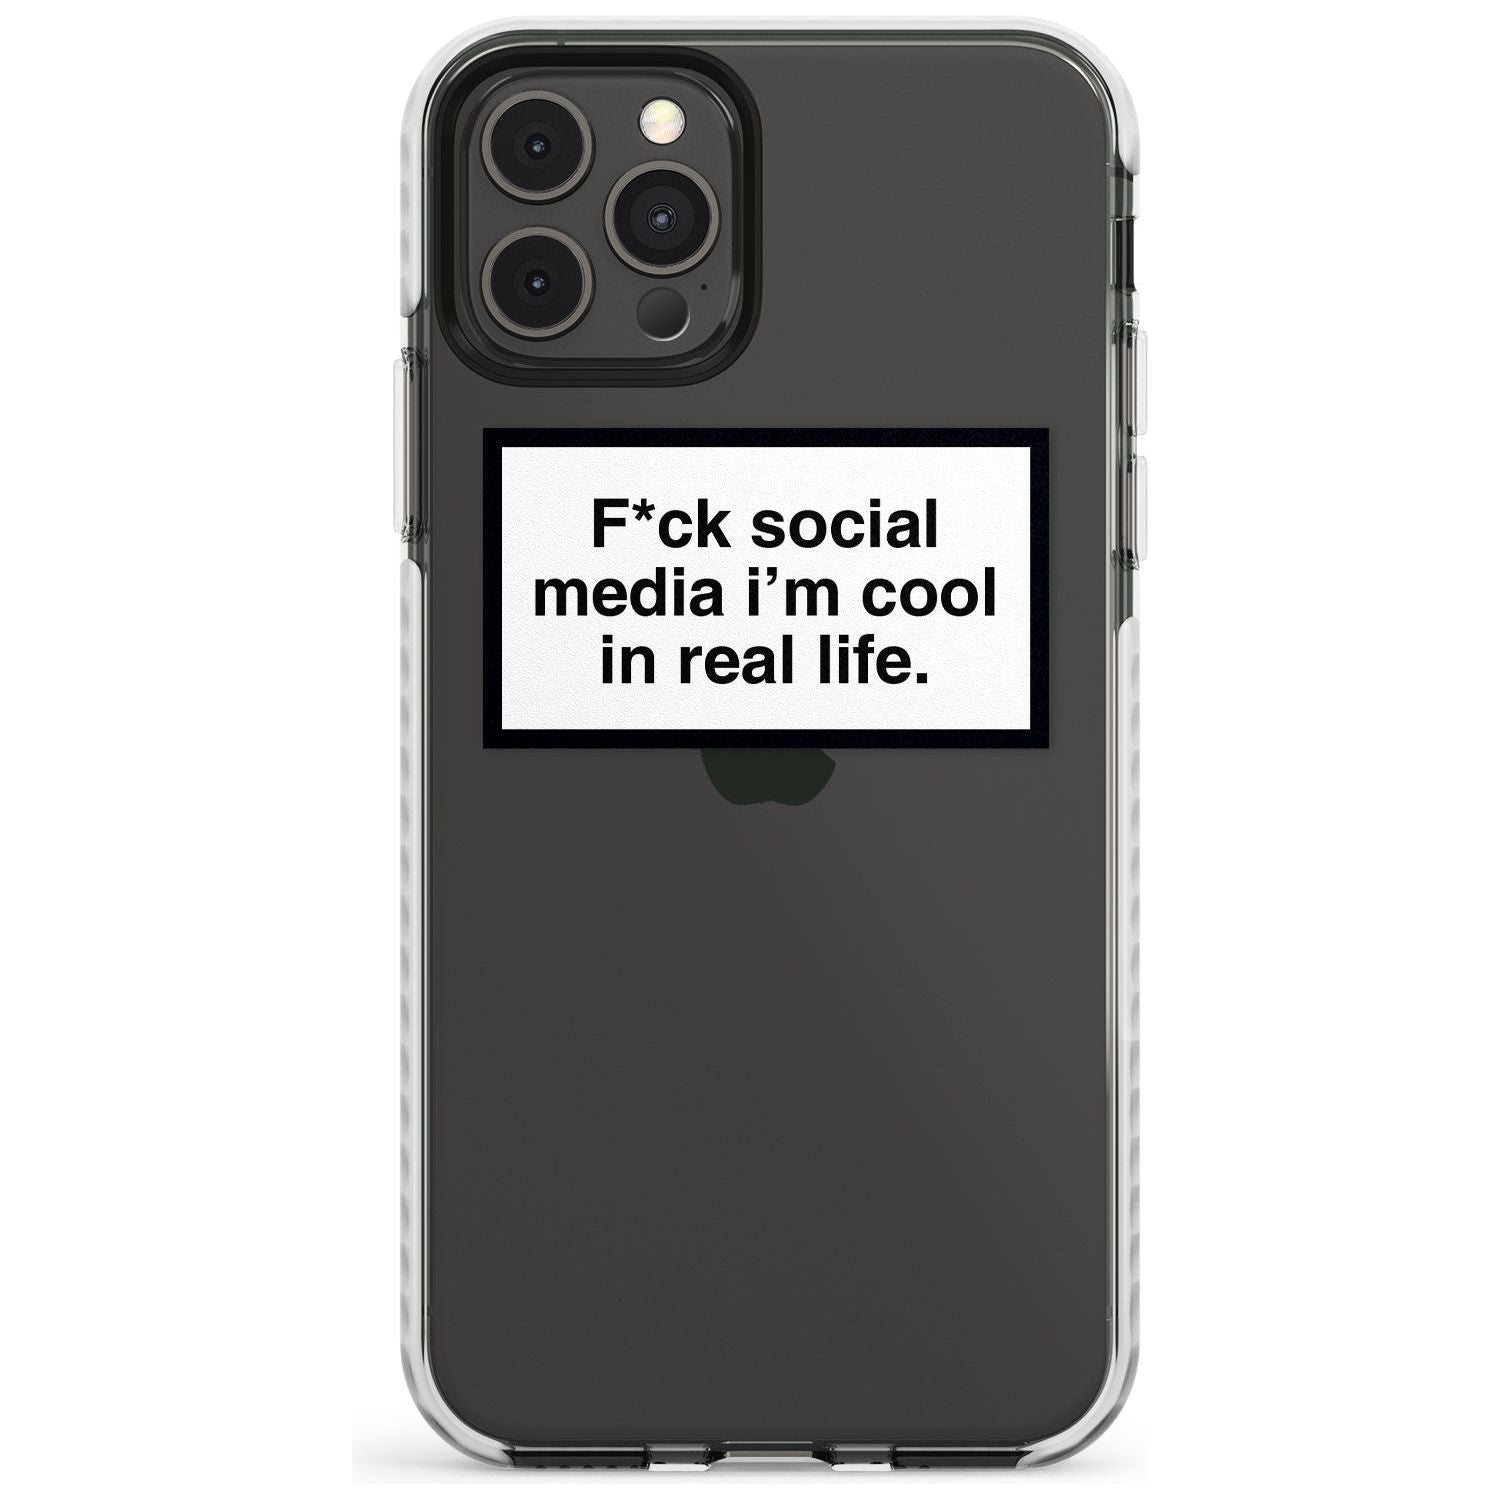 F*ck social media I'm cool in real life Slim TPU Phone Case for iPhone 11 Pro Max